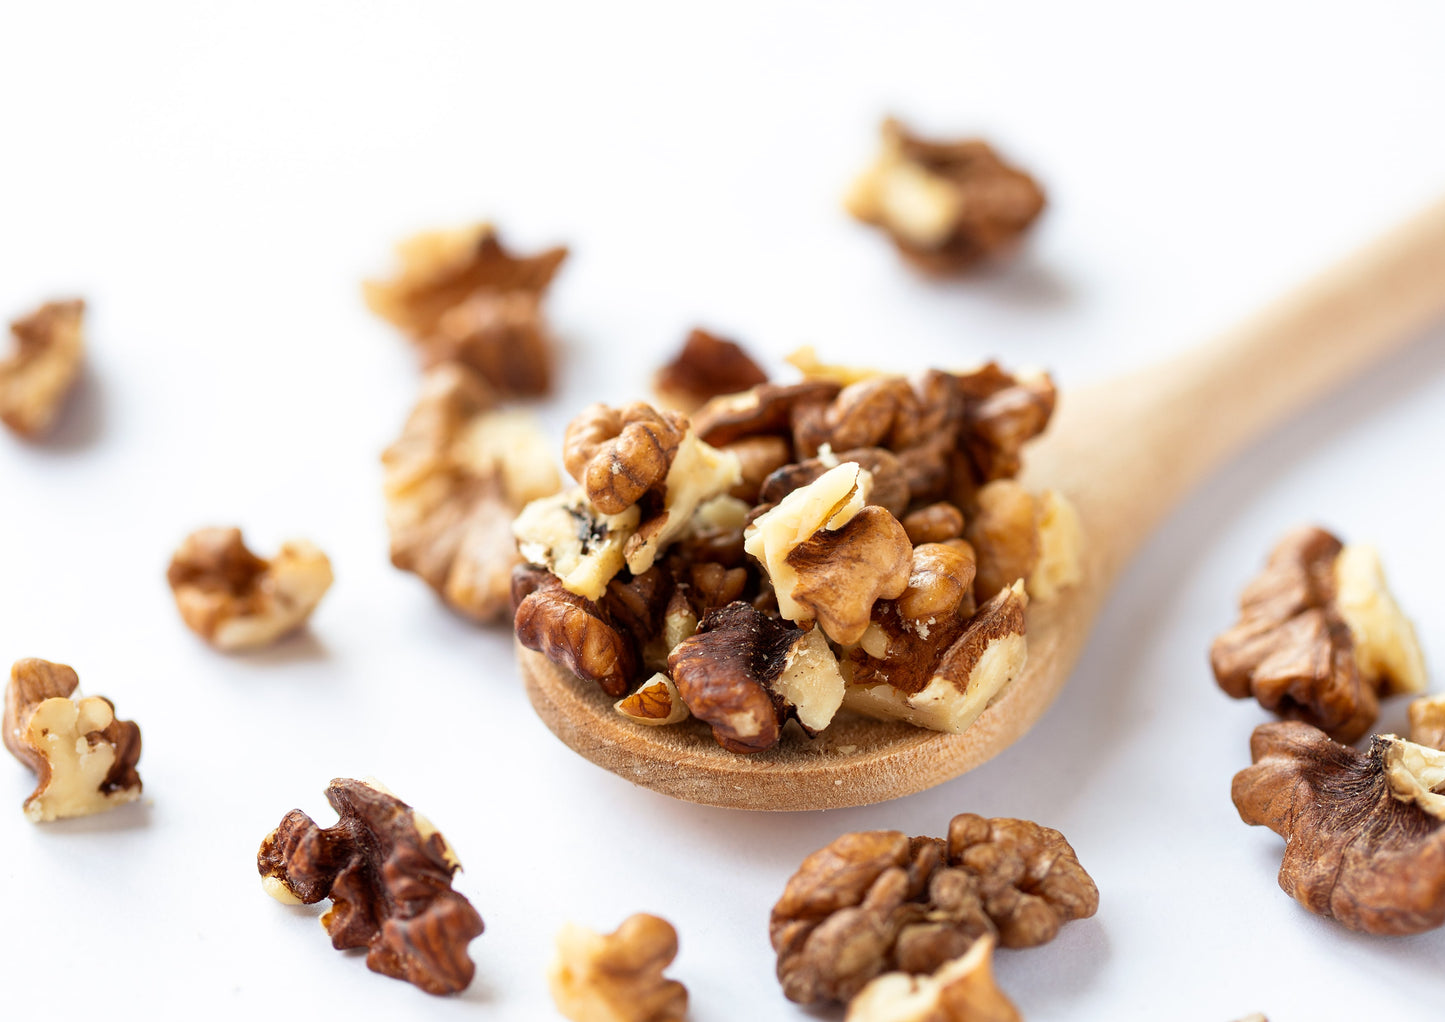 California Walnut Pieces – Non-GMO Verified, Chopped Nuts, Shelled, Raw, Unsalted, Vegan, Bulk. Keto Snack. Good Source of Protein, Iron. Great for Salads, Desserts, Ice Cream, Made in USA